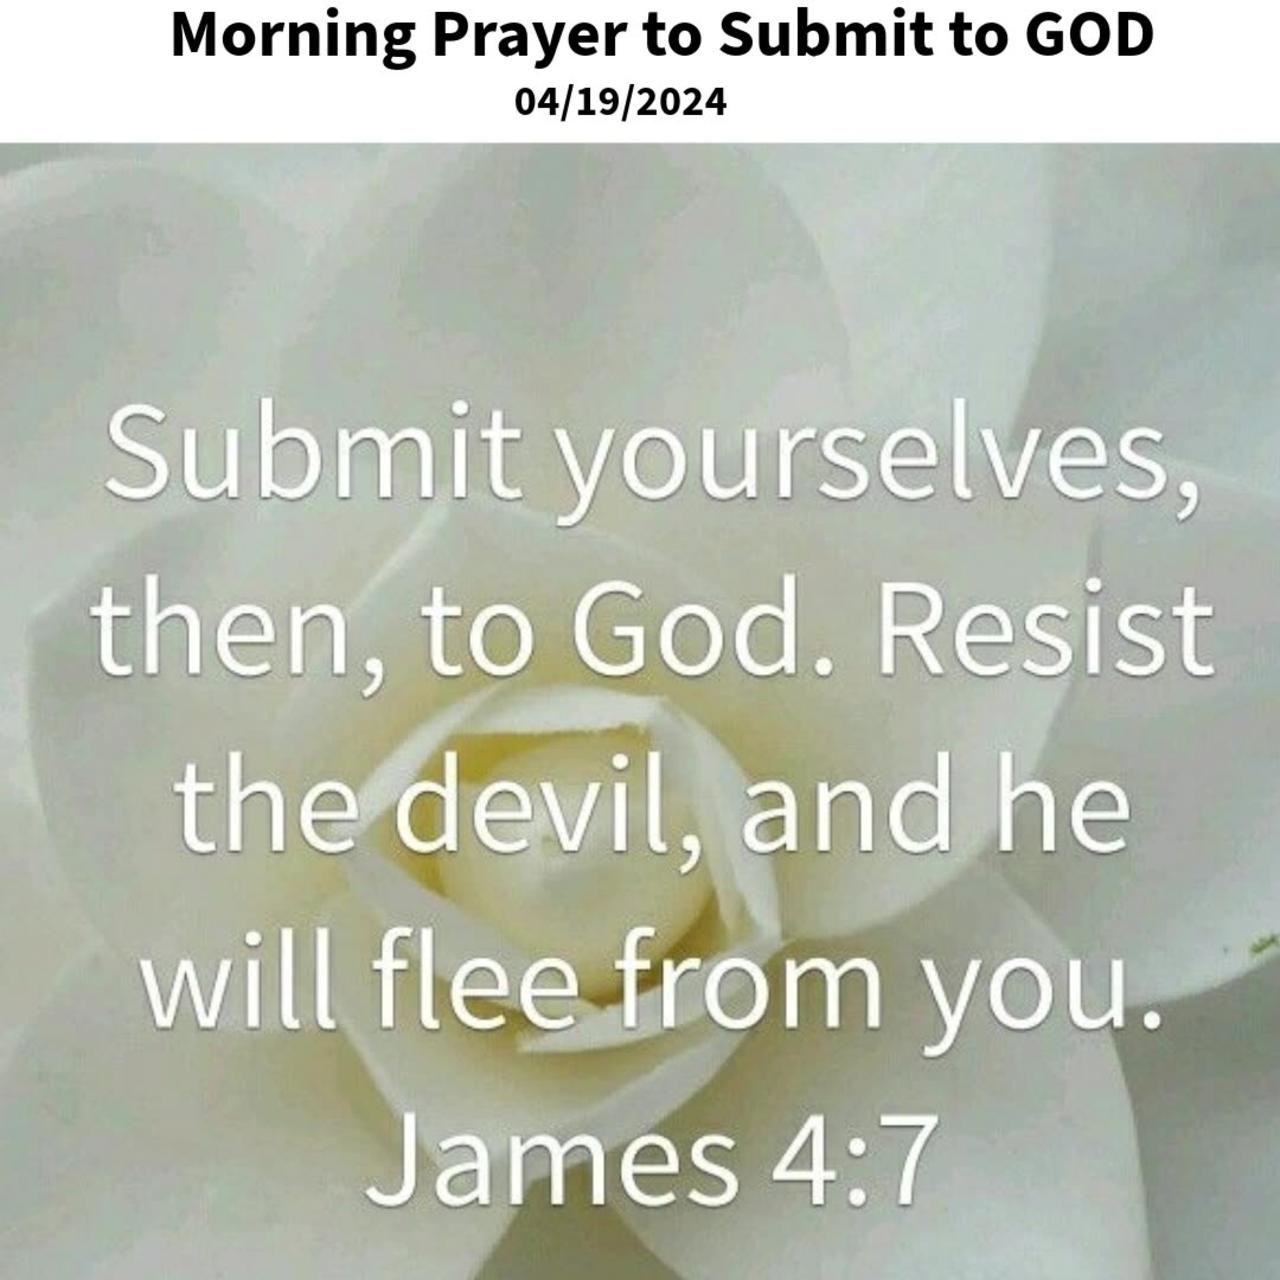 Morning Prayer to Submit to GOD #youtubeshorts #jesus #grace #mercy #faith #bless #fyp #trust #love